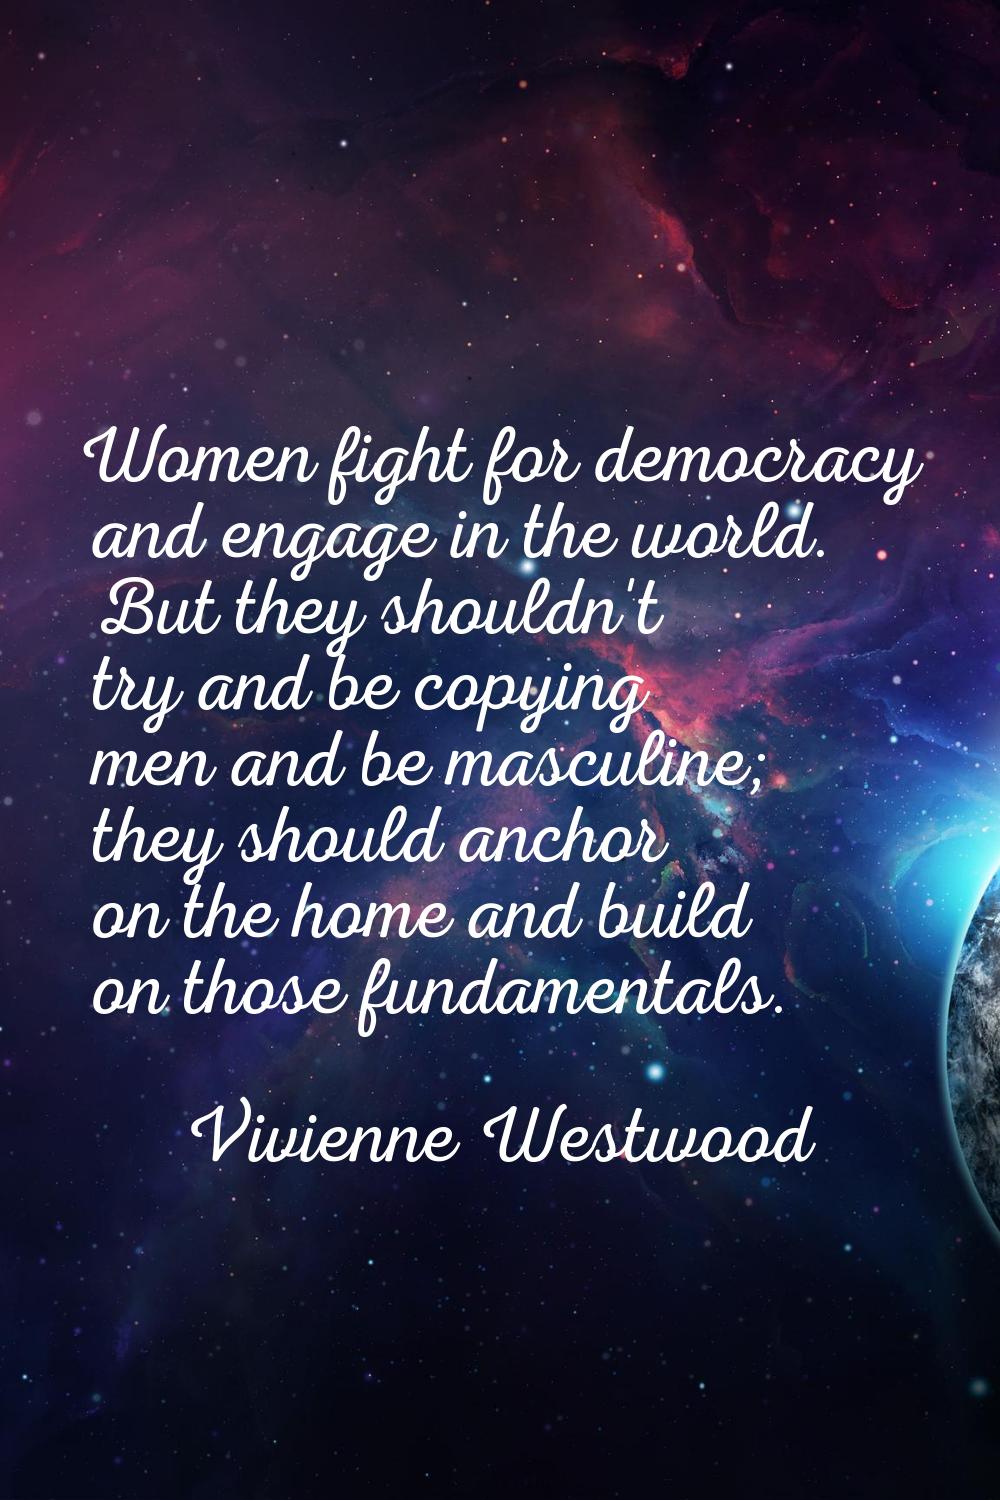 Women fight for democracy and engage in the world. But they shouldn't try and be copying men and be